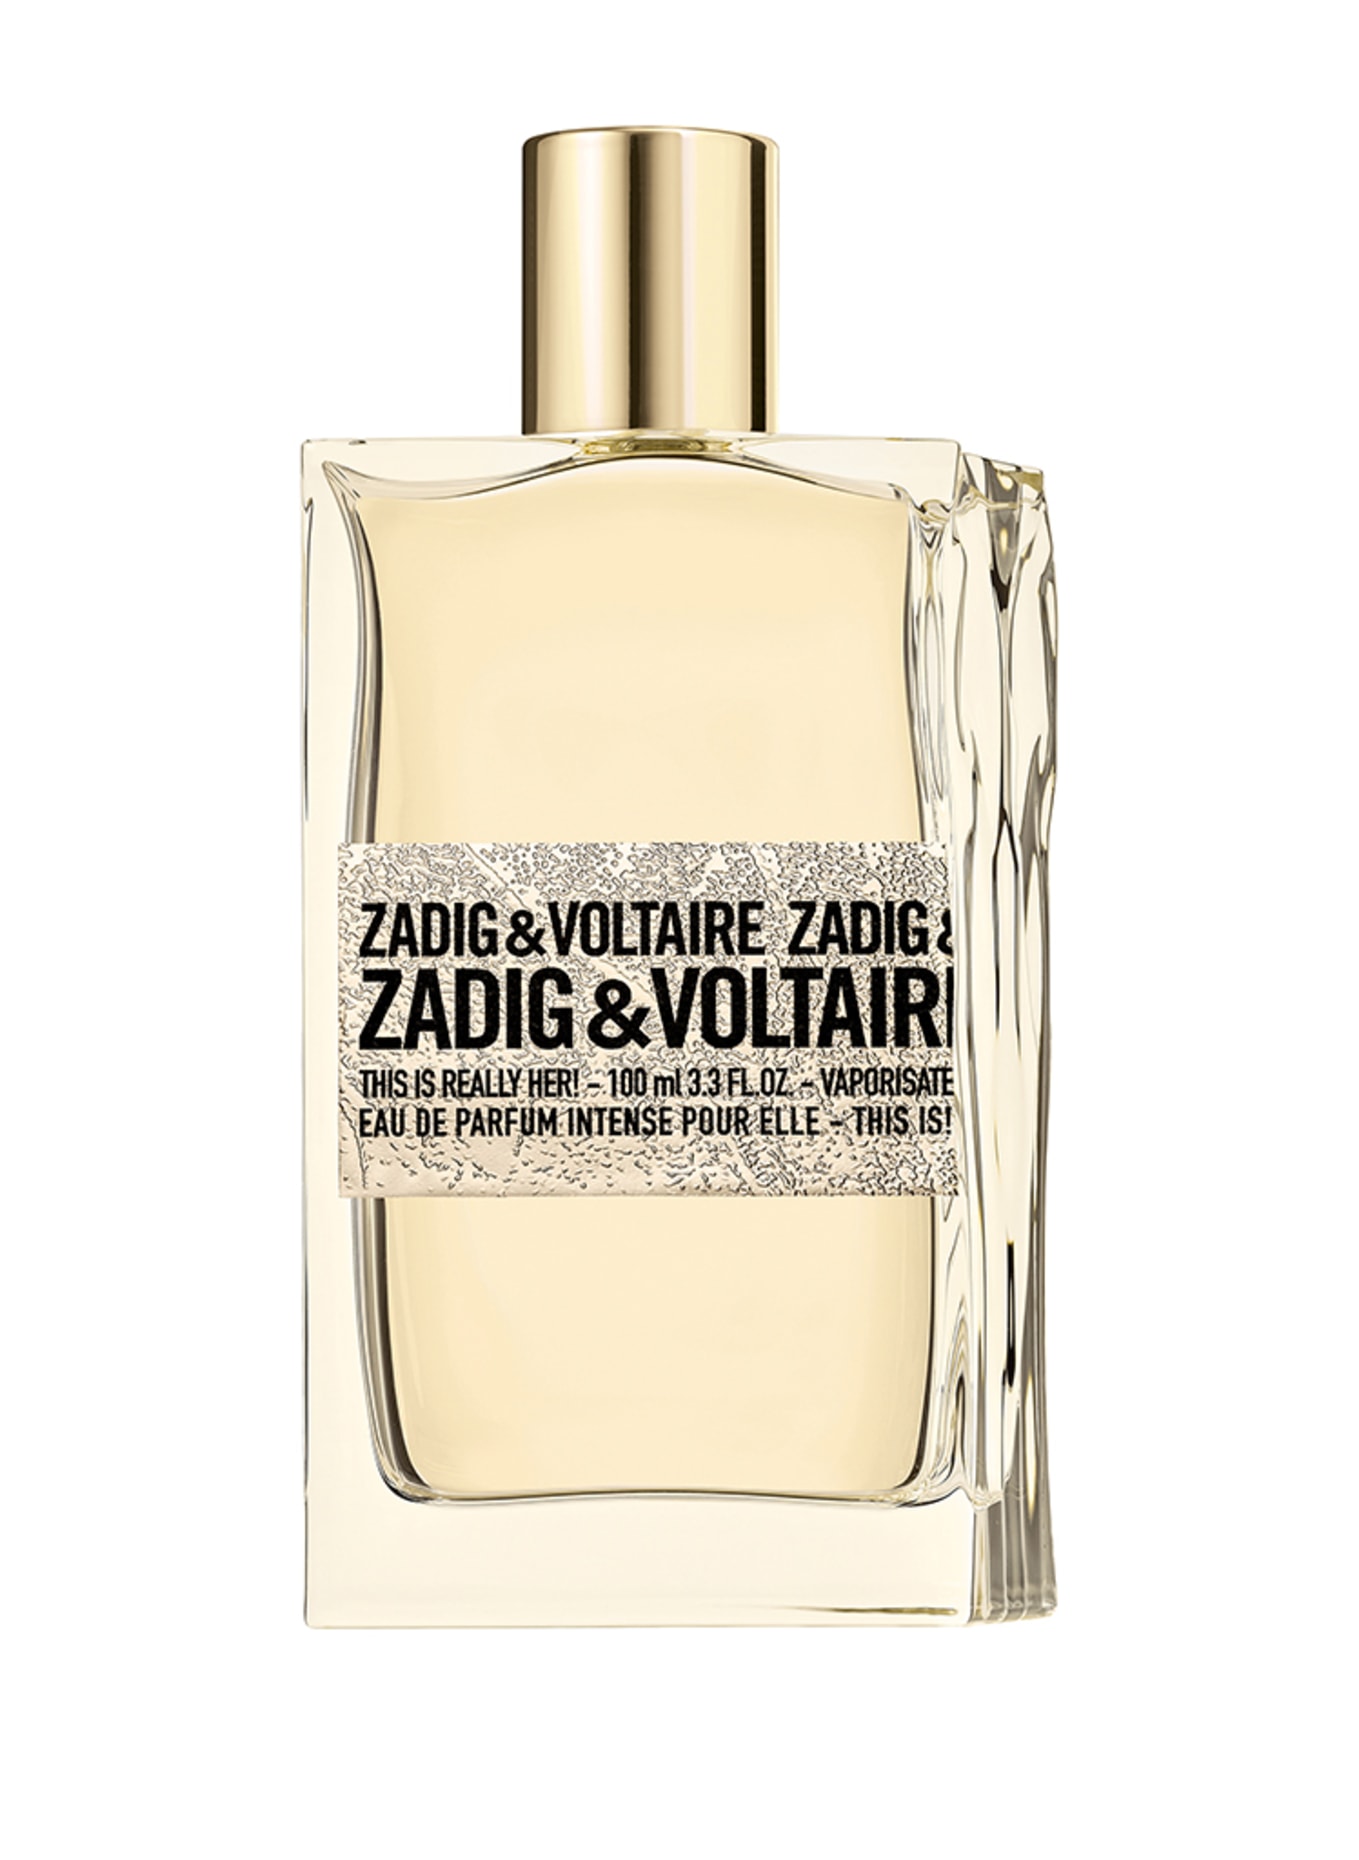 ZADIG & VOLTAIRE Fragrances THIS IS REALLY HER! (Obrazek 1)